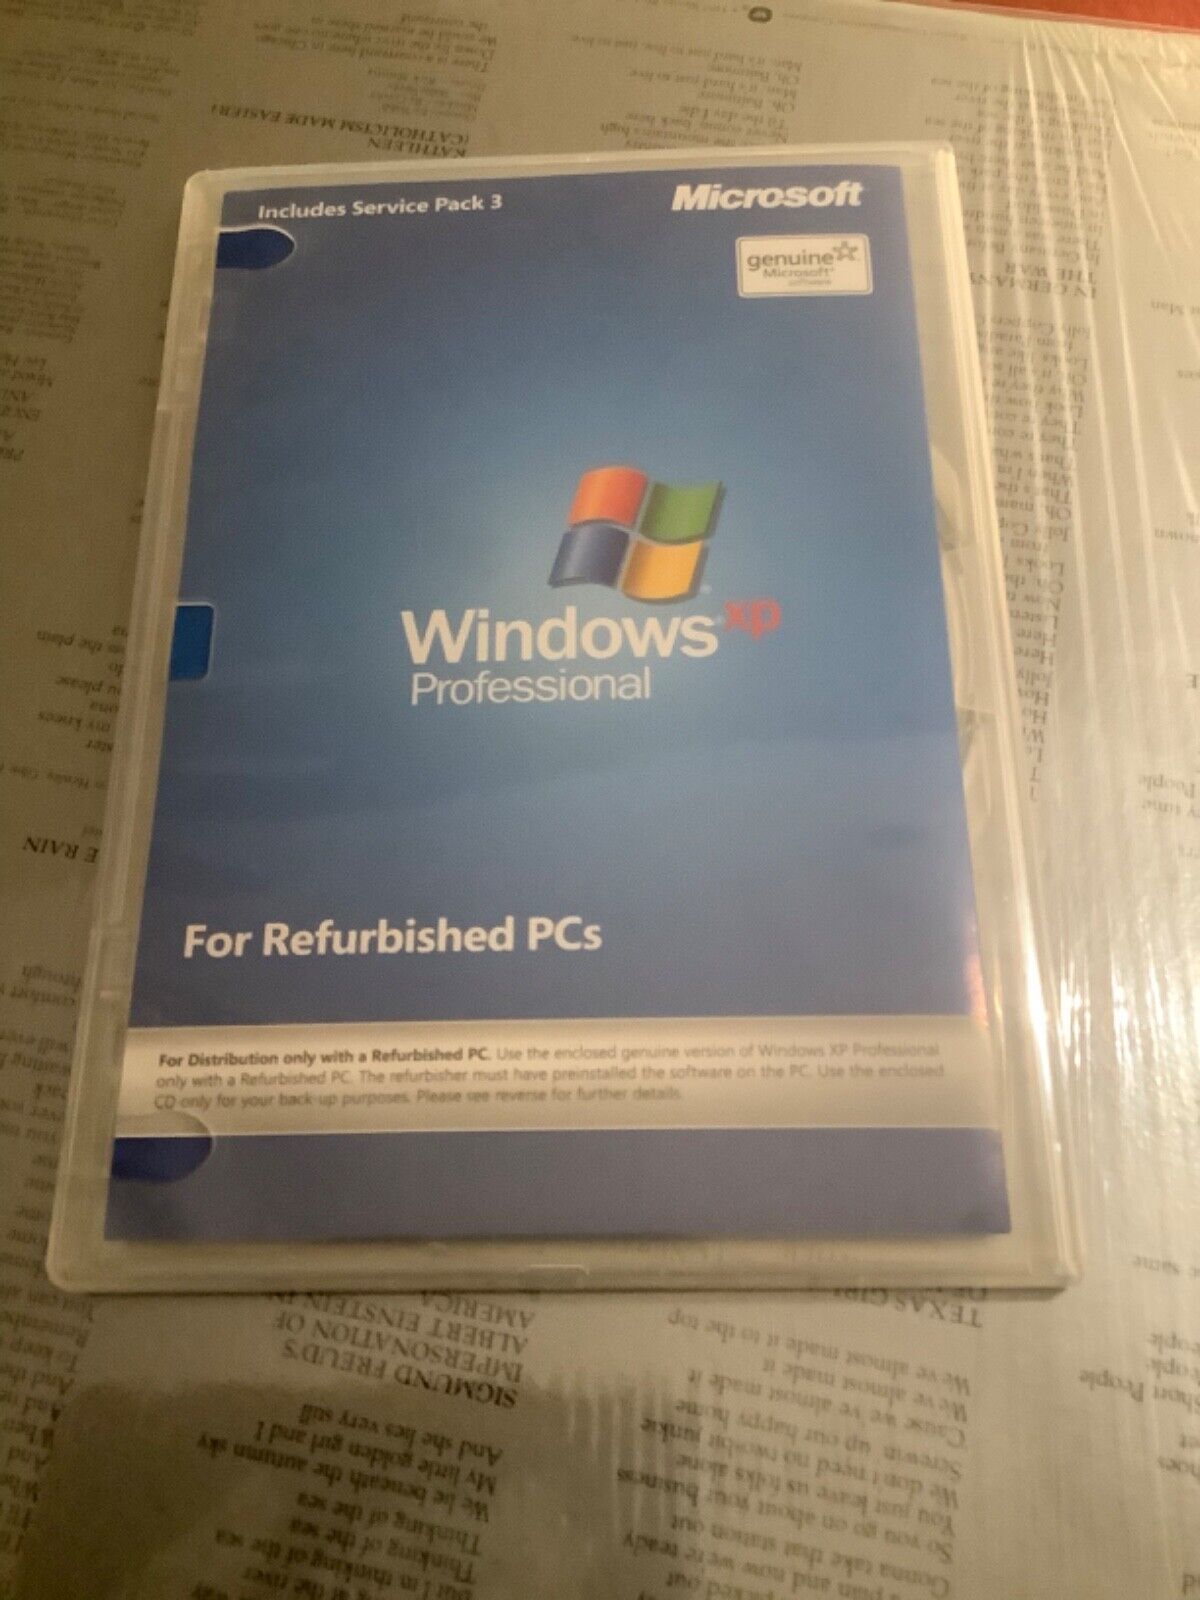 Windows XP Professional - Includes SP3 - For Refurbished PCs * No Product Key *